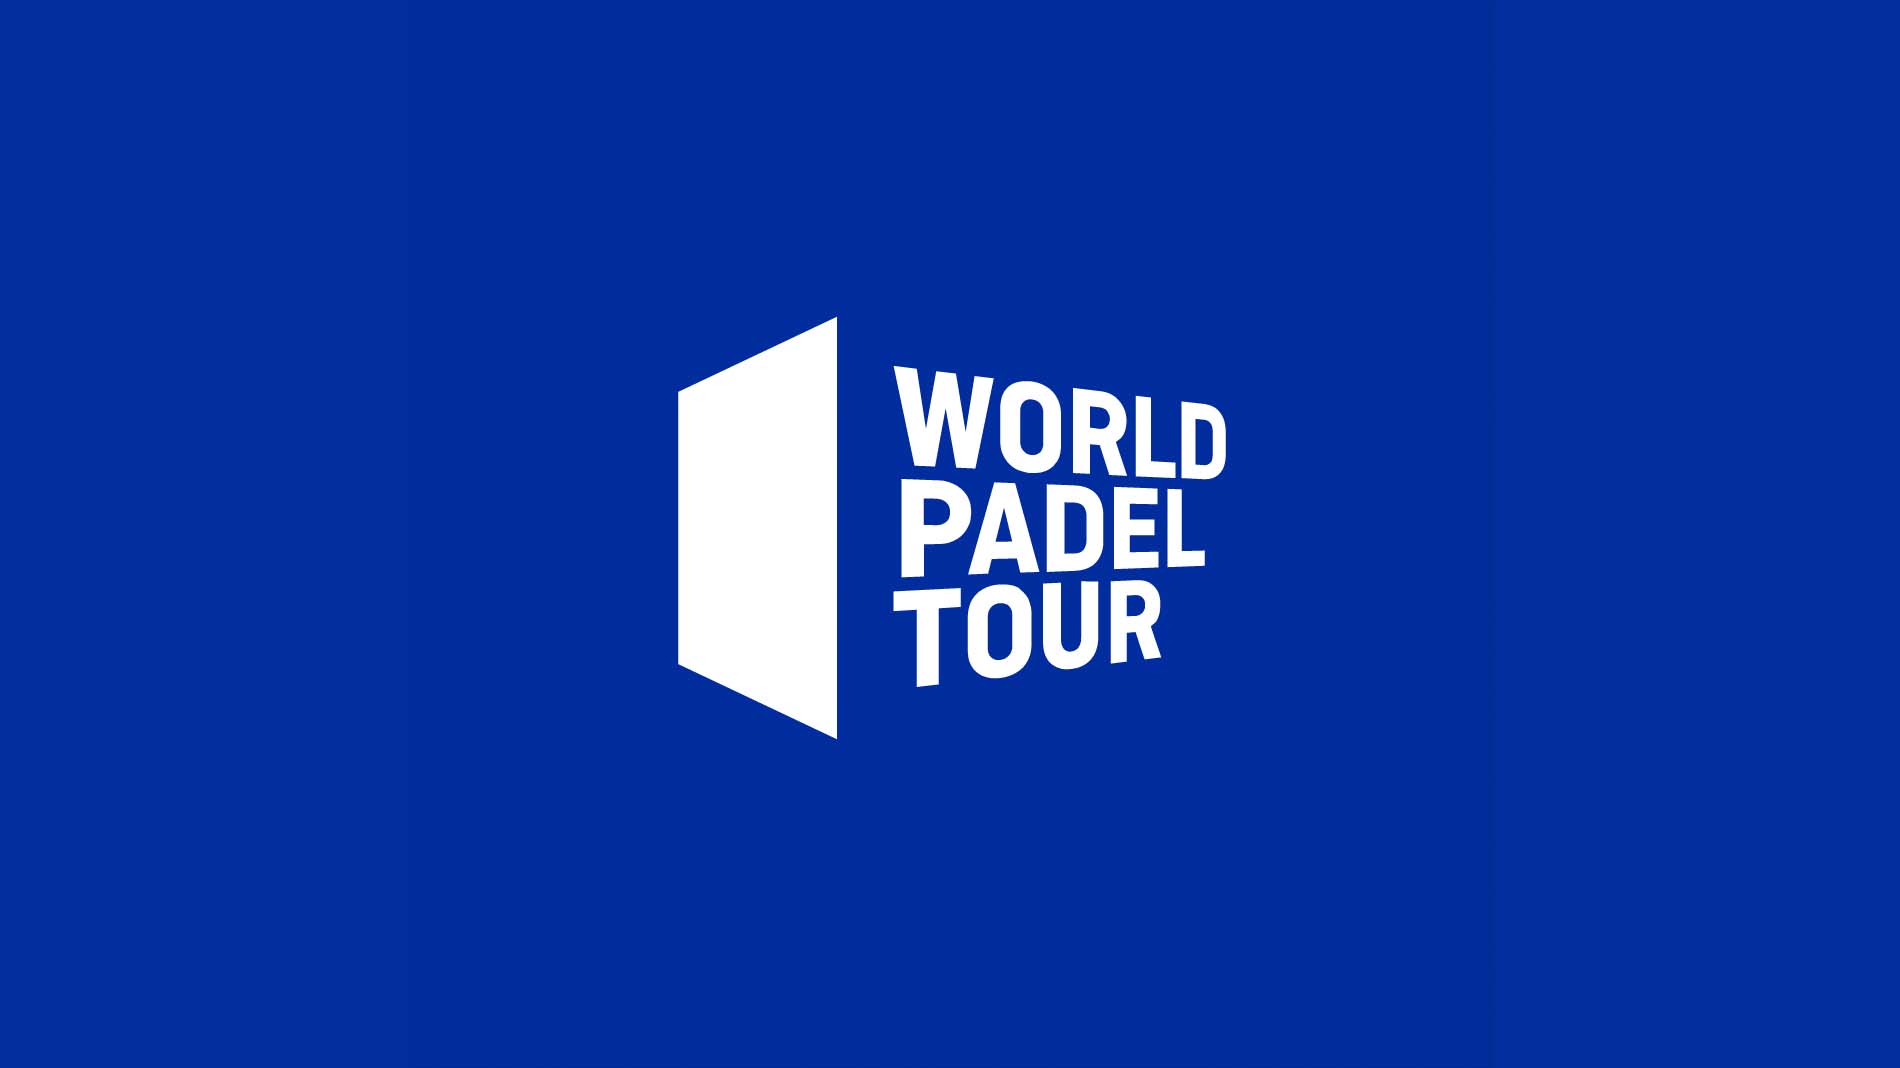 Damm acquires 100% of World Padel Tour